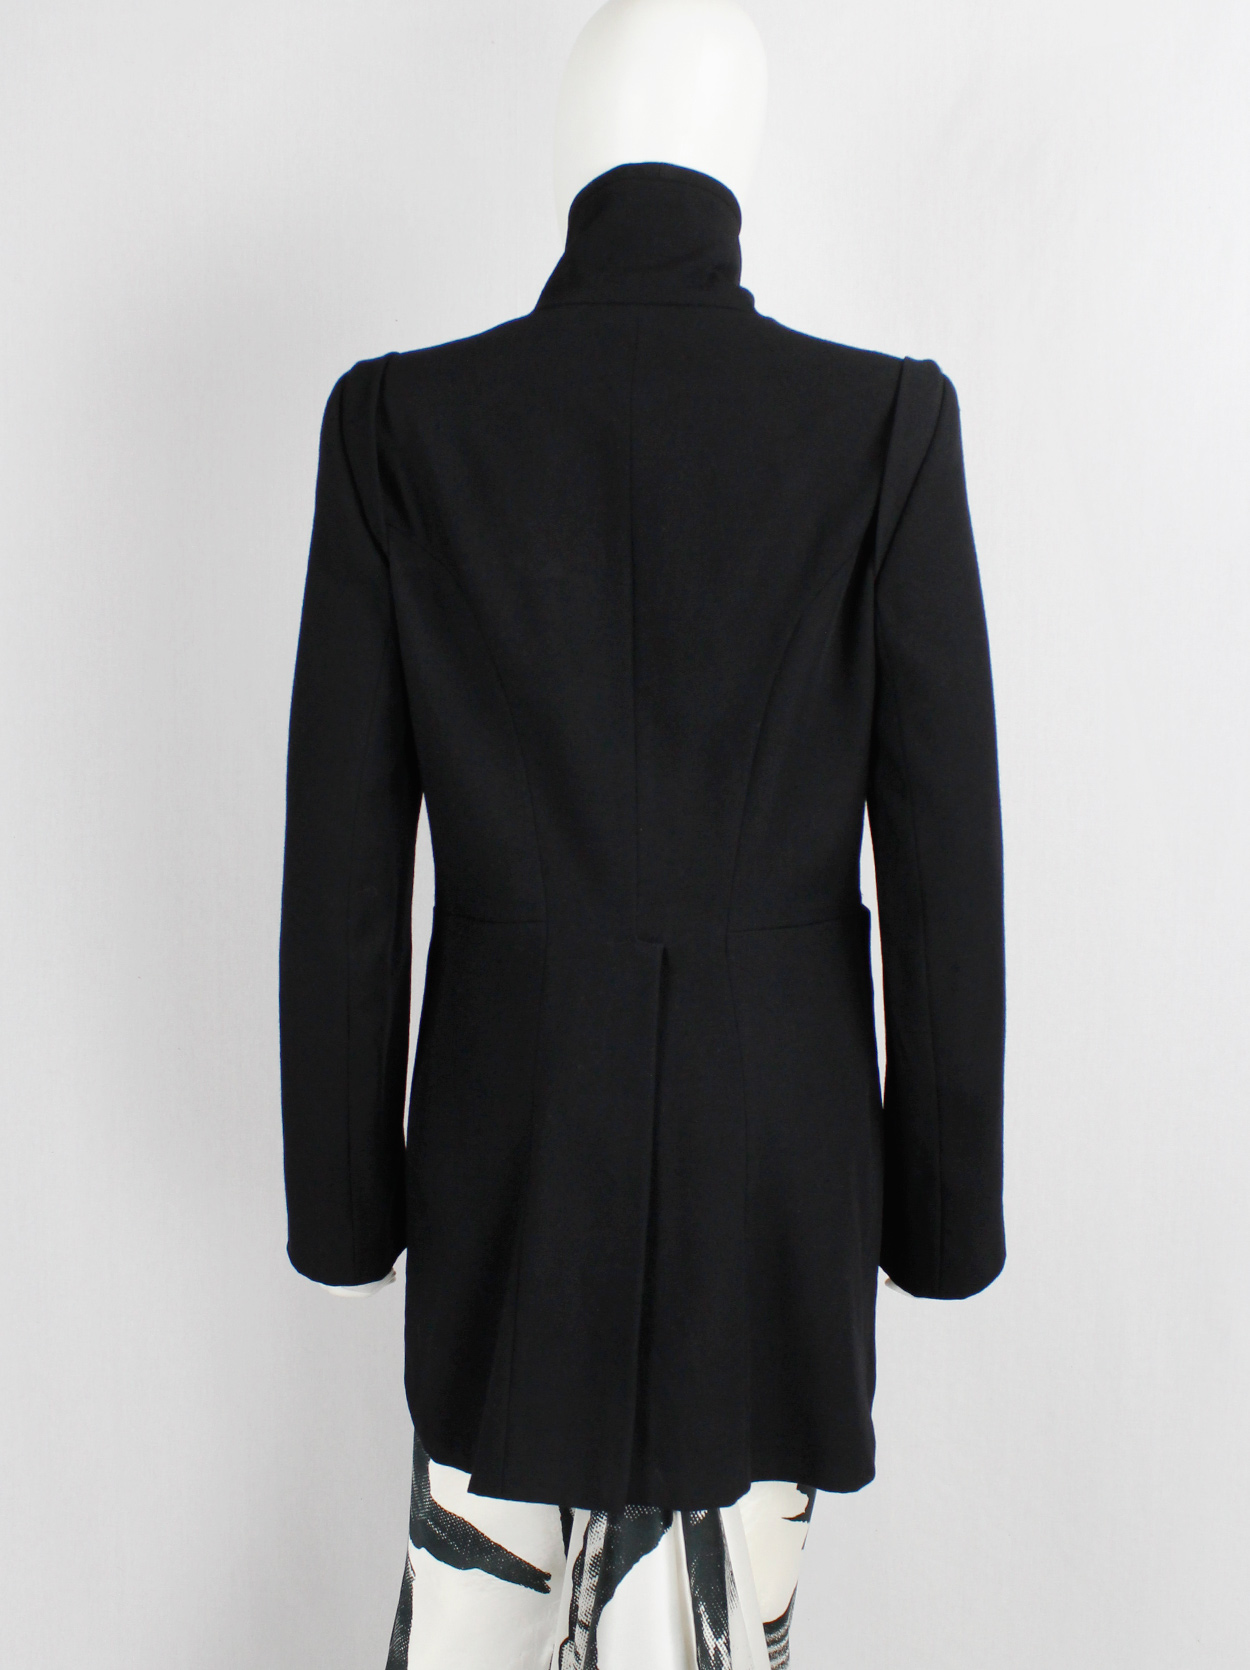 Ann Demeulemeester black cutaway tailcoat with curved buttoned front ...